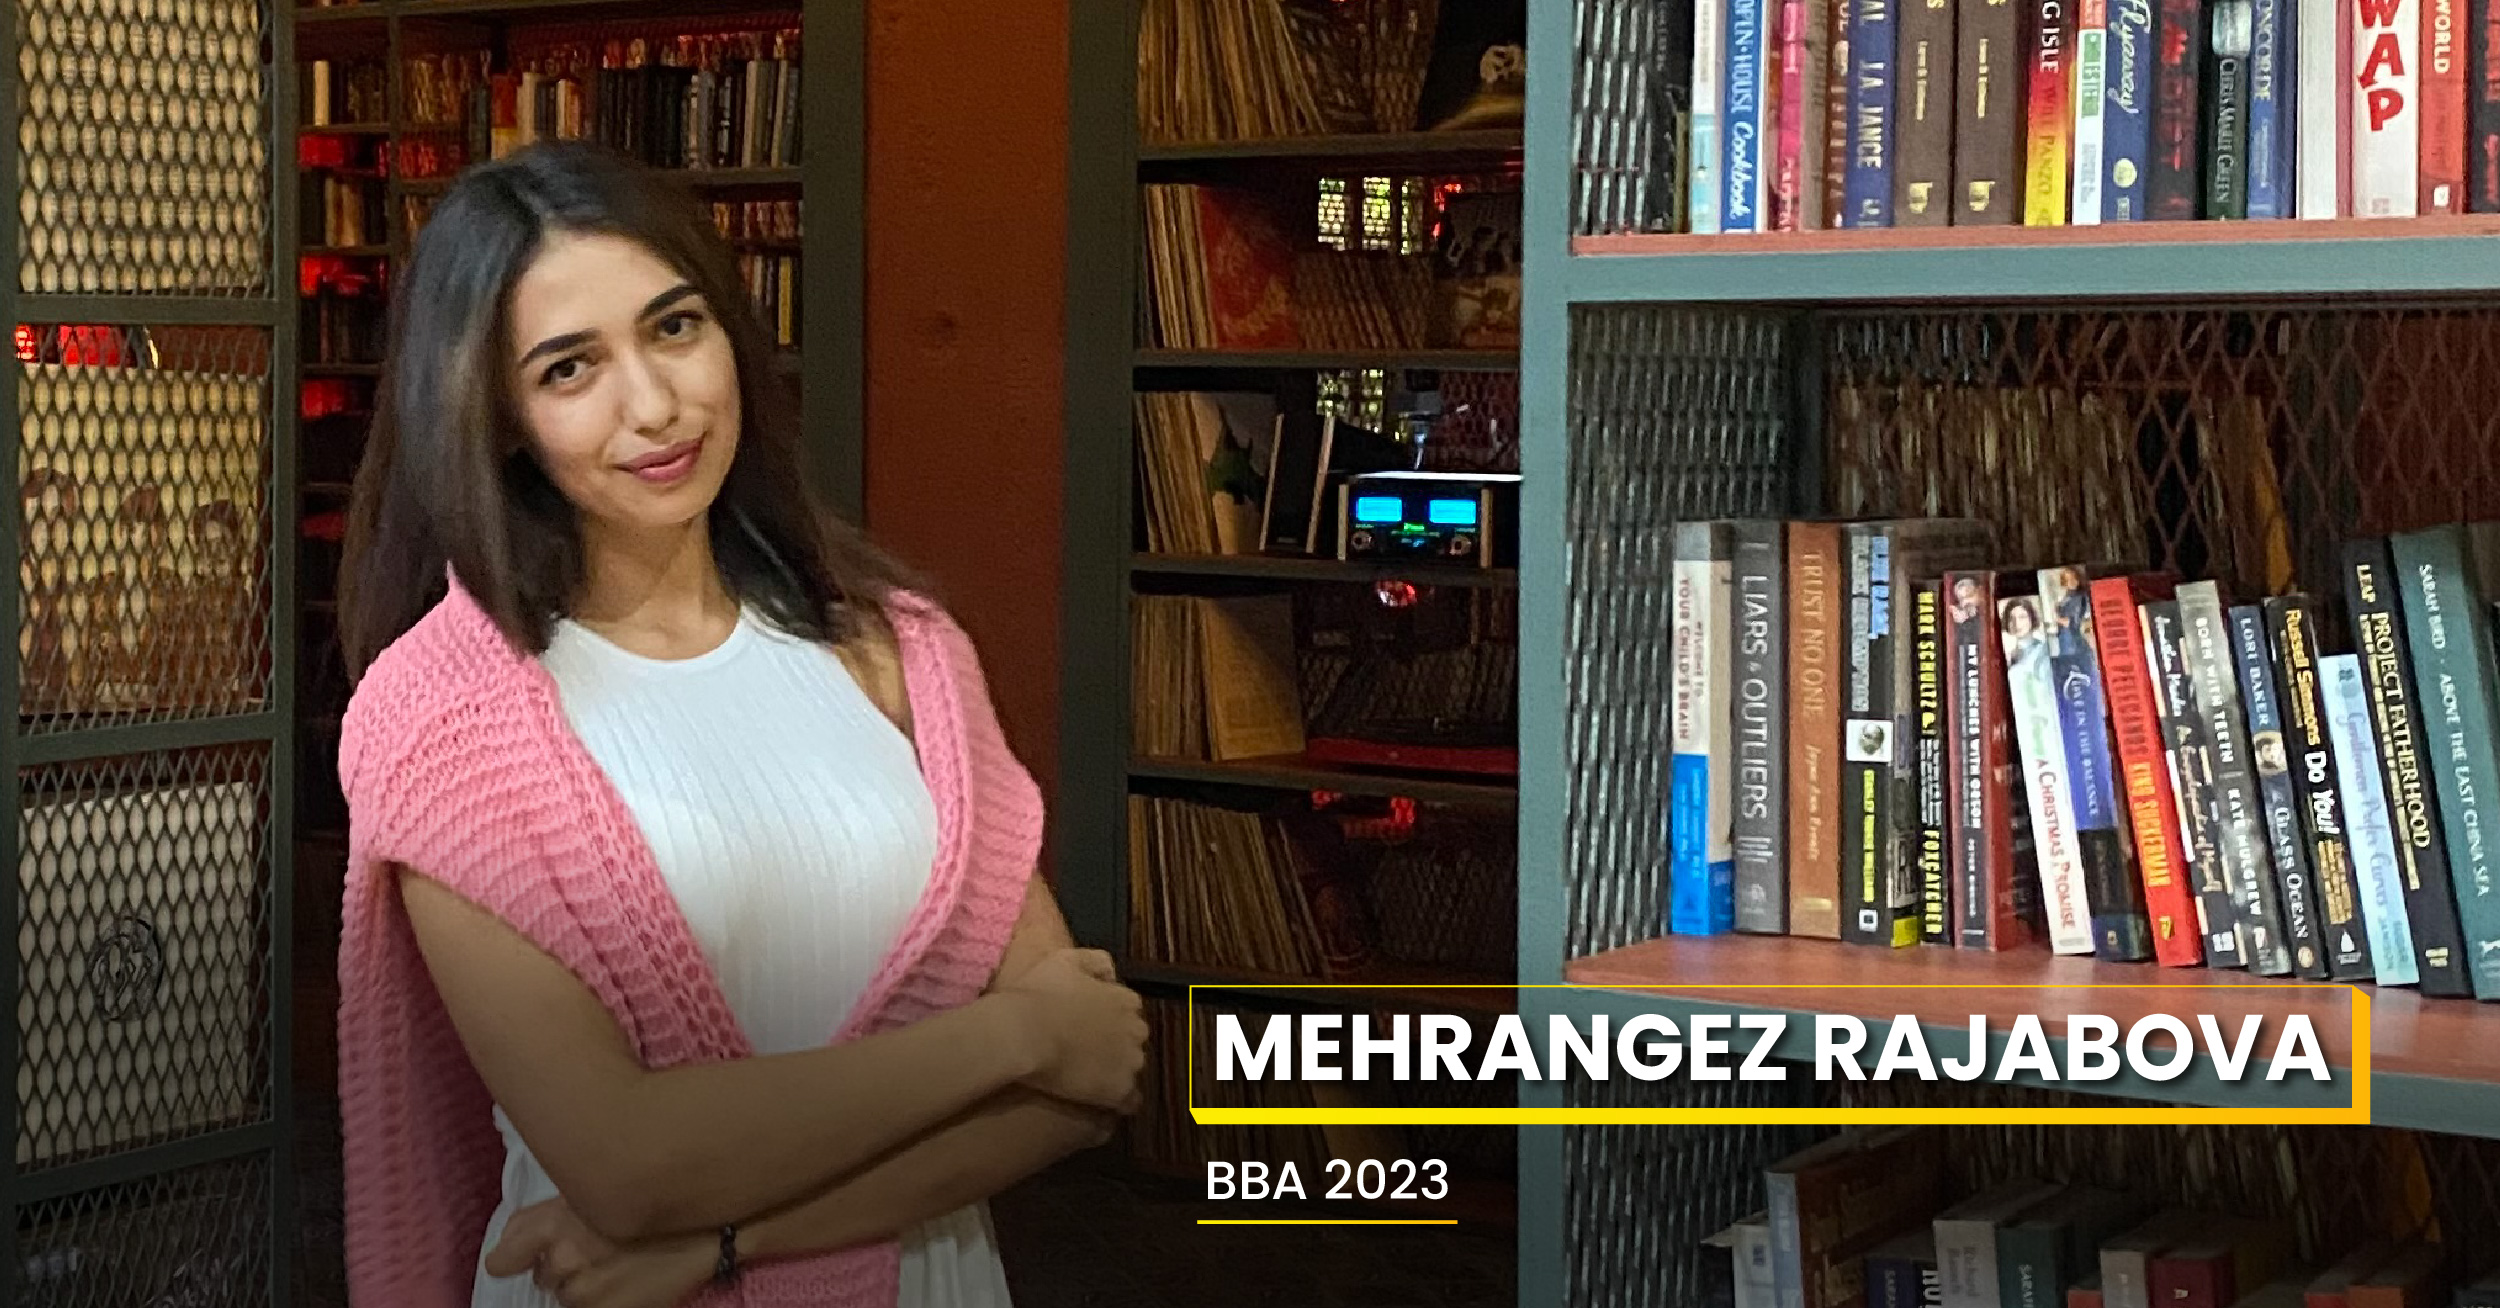 Embracing Diversity and Global Learning with SP Jain Global - Mehrangez Rajabova’s (BBA 2023) Tri-city Experience